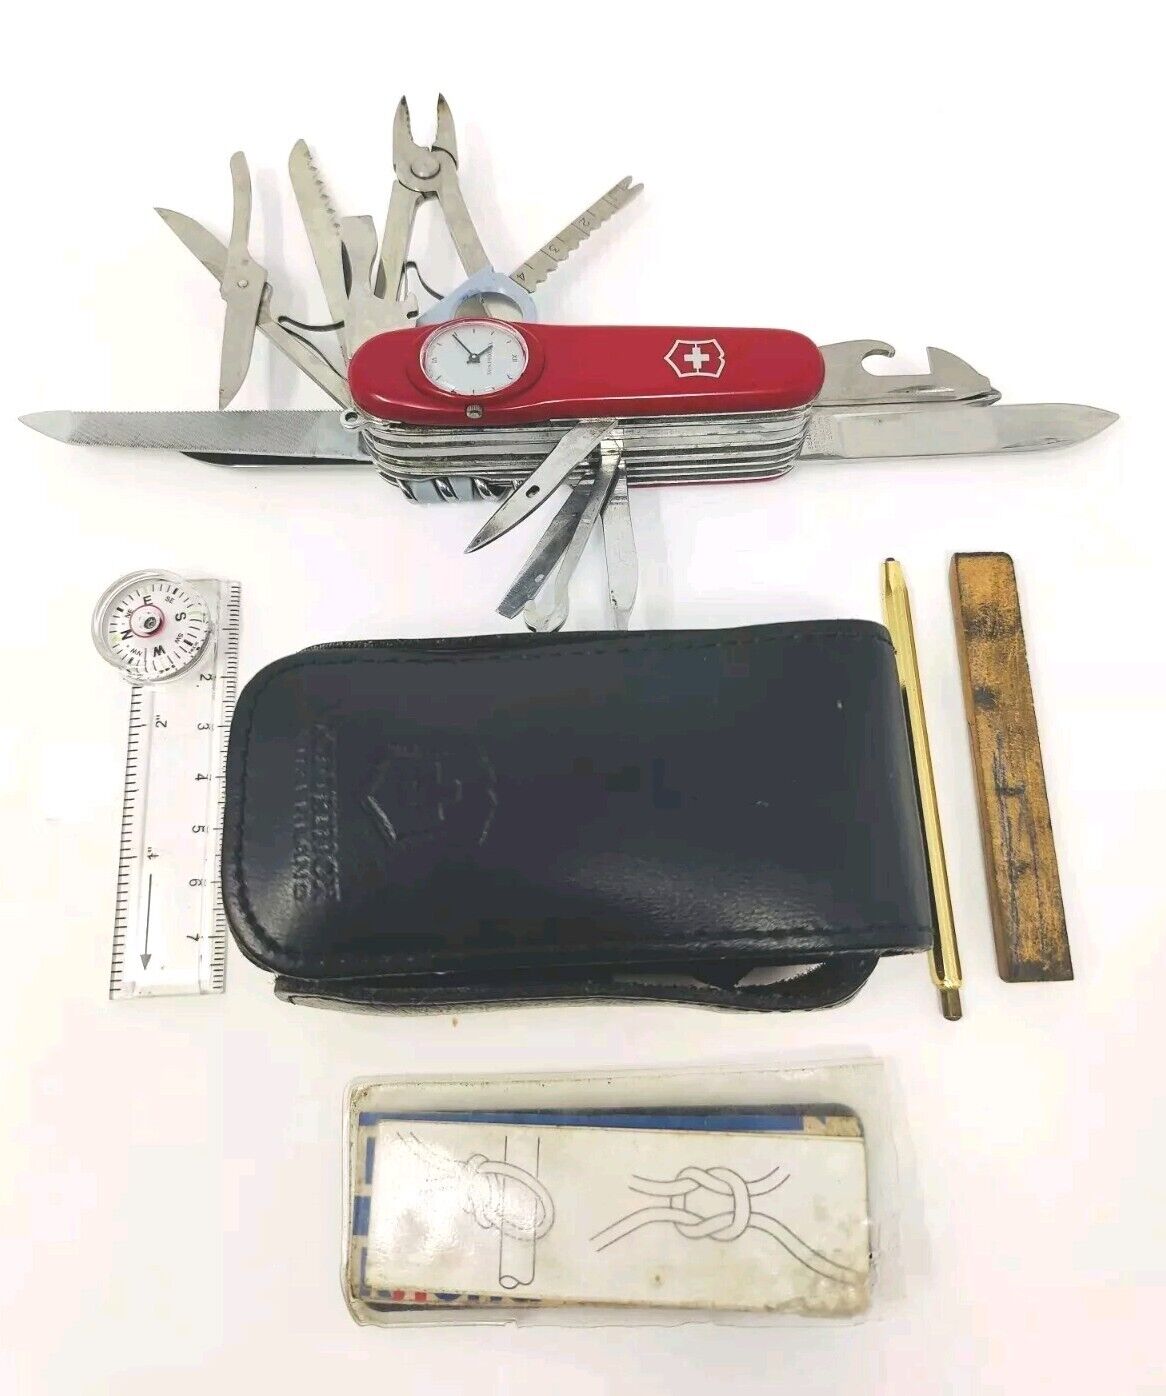 Vintage Victorinox Time Keeper Swiss Army Knife With Sheath, Compass, & Extras